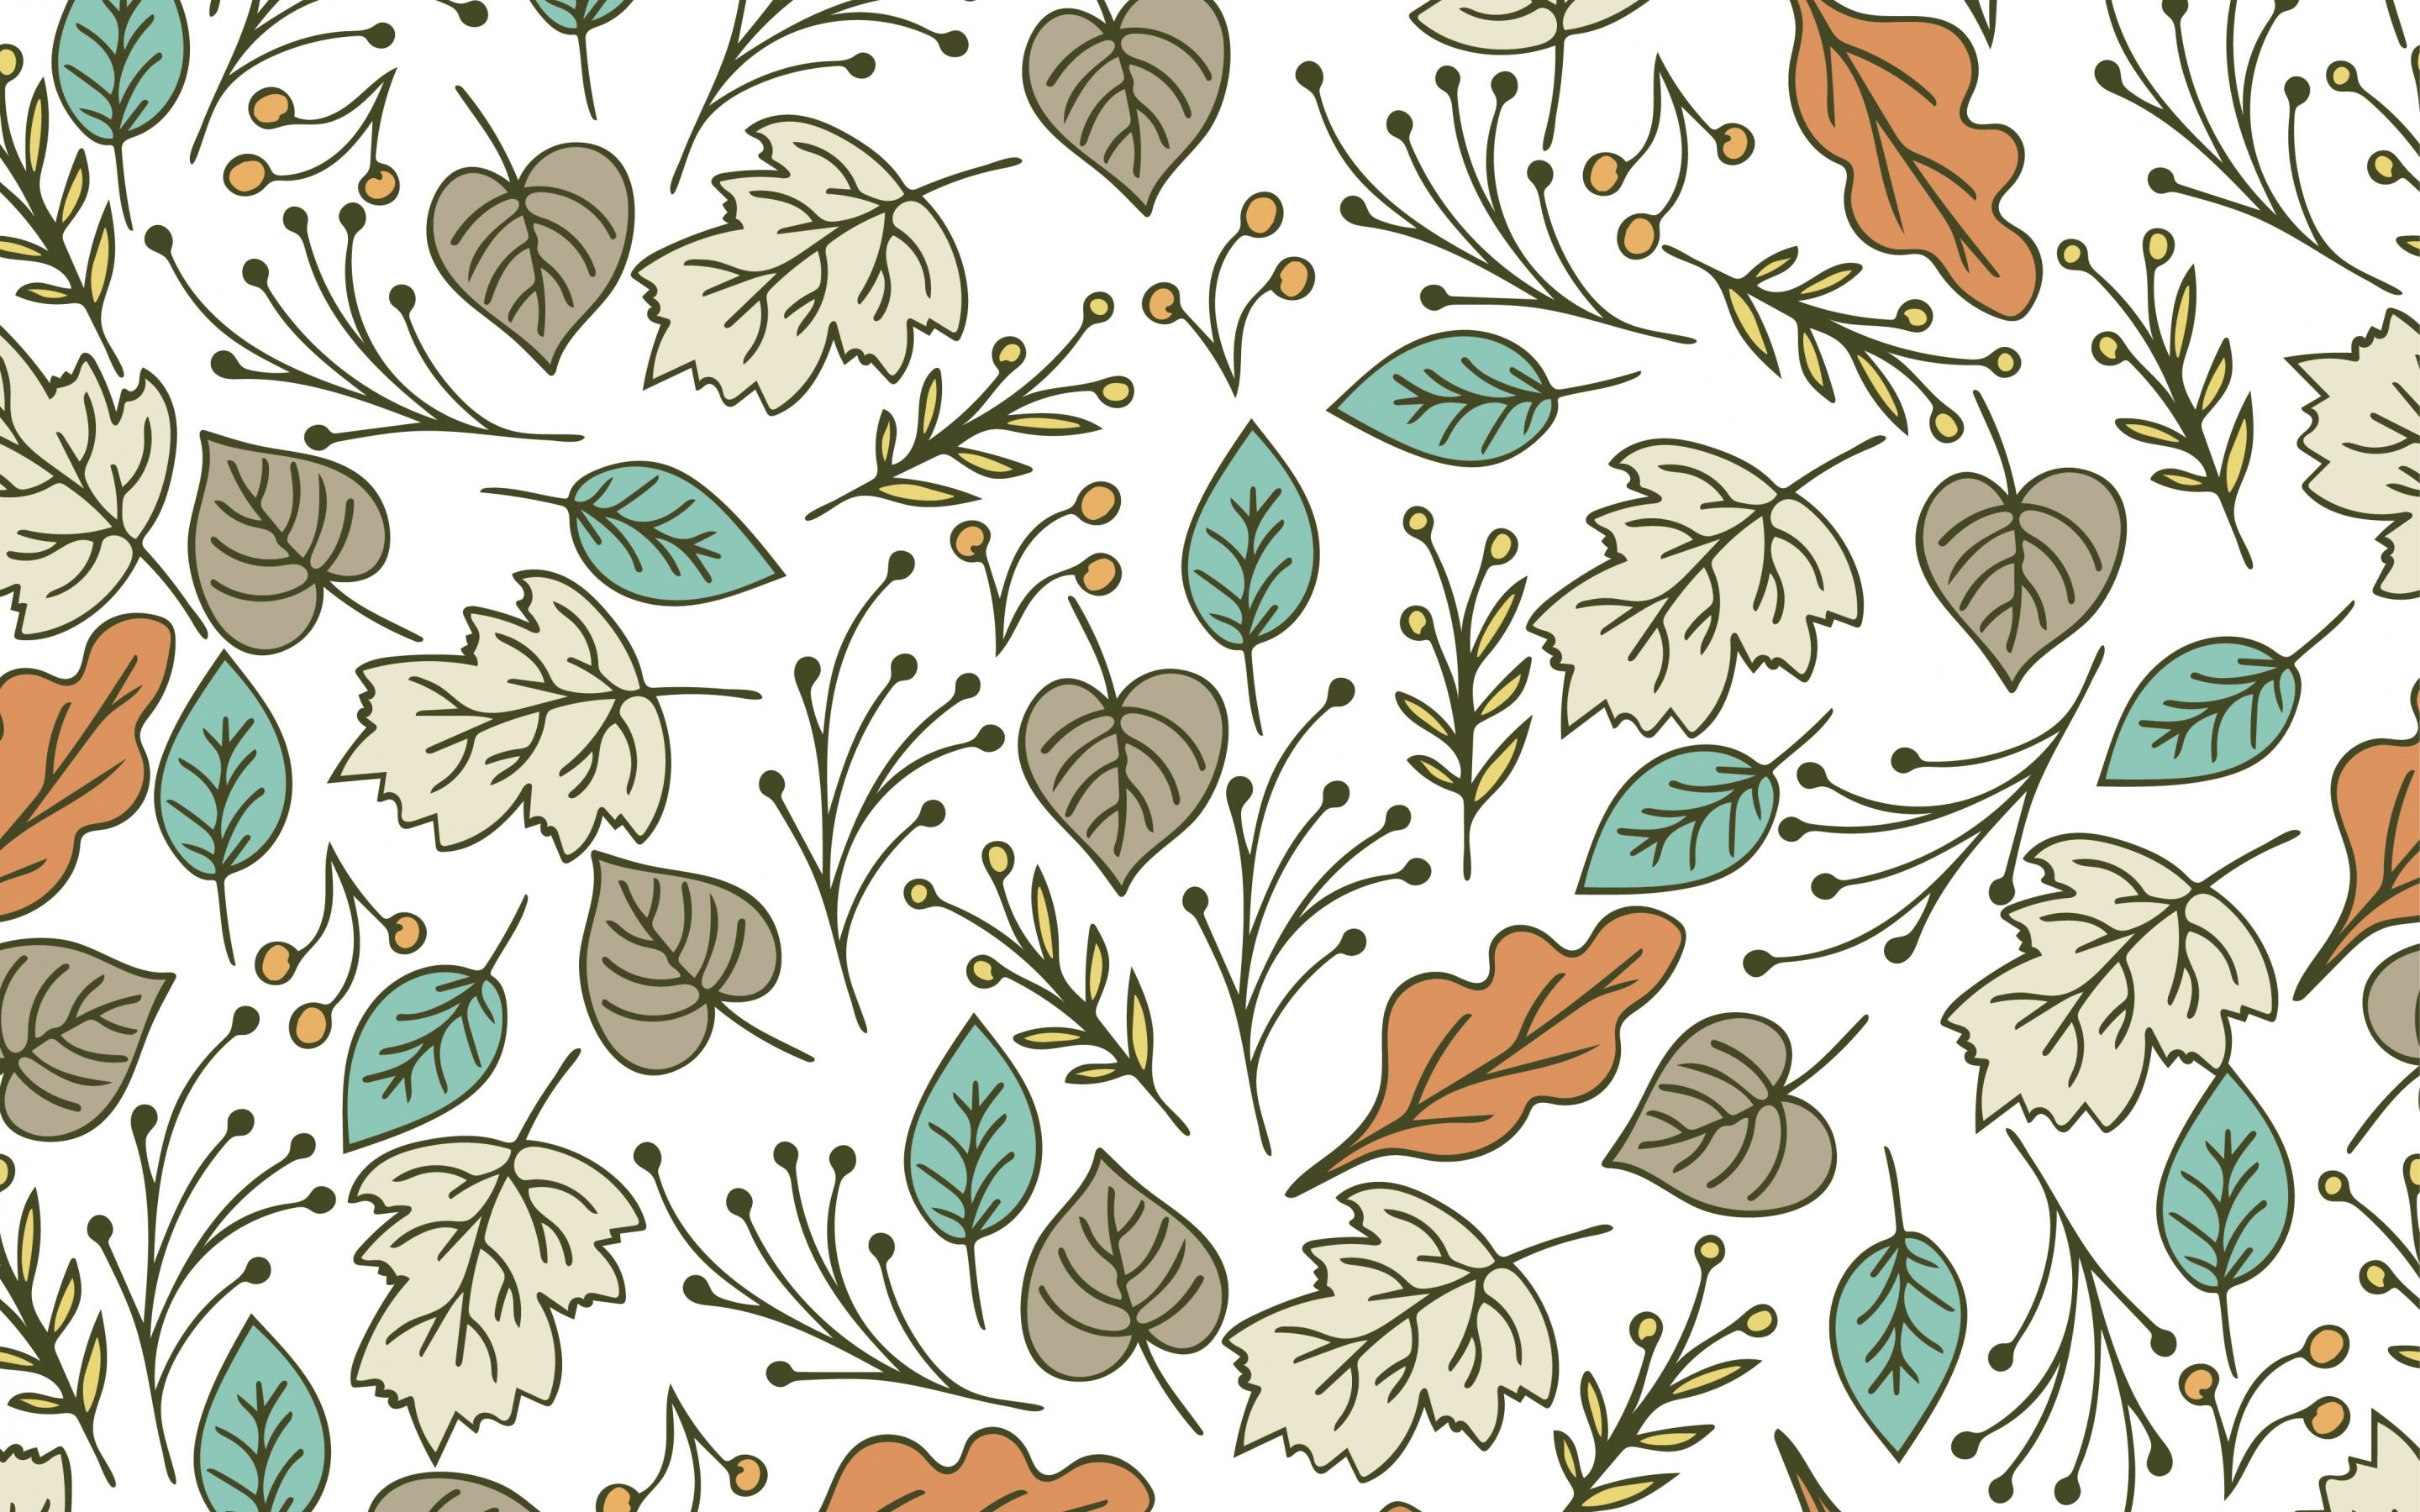 Download wallpaper retro texture with leaves, retro leaves background, retro texture, floral retro background, floral texture, autumn texture, retro autumn background for desktop with resolution 2880x1800. High Quality HD picture wallpaper